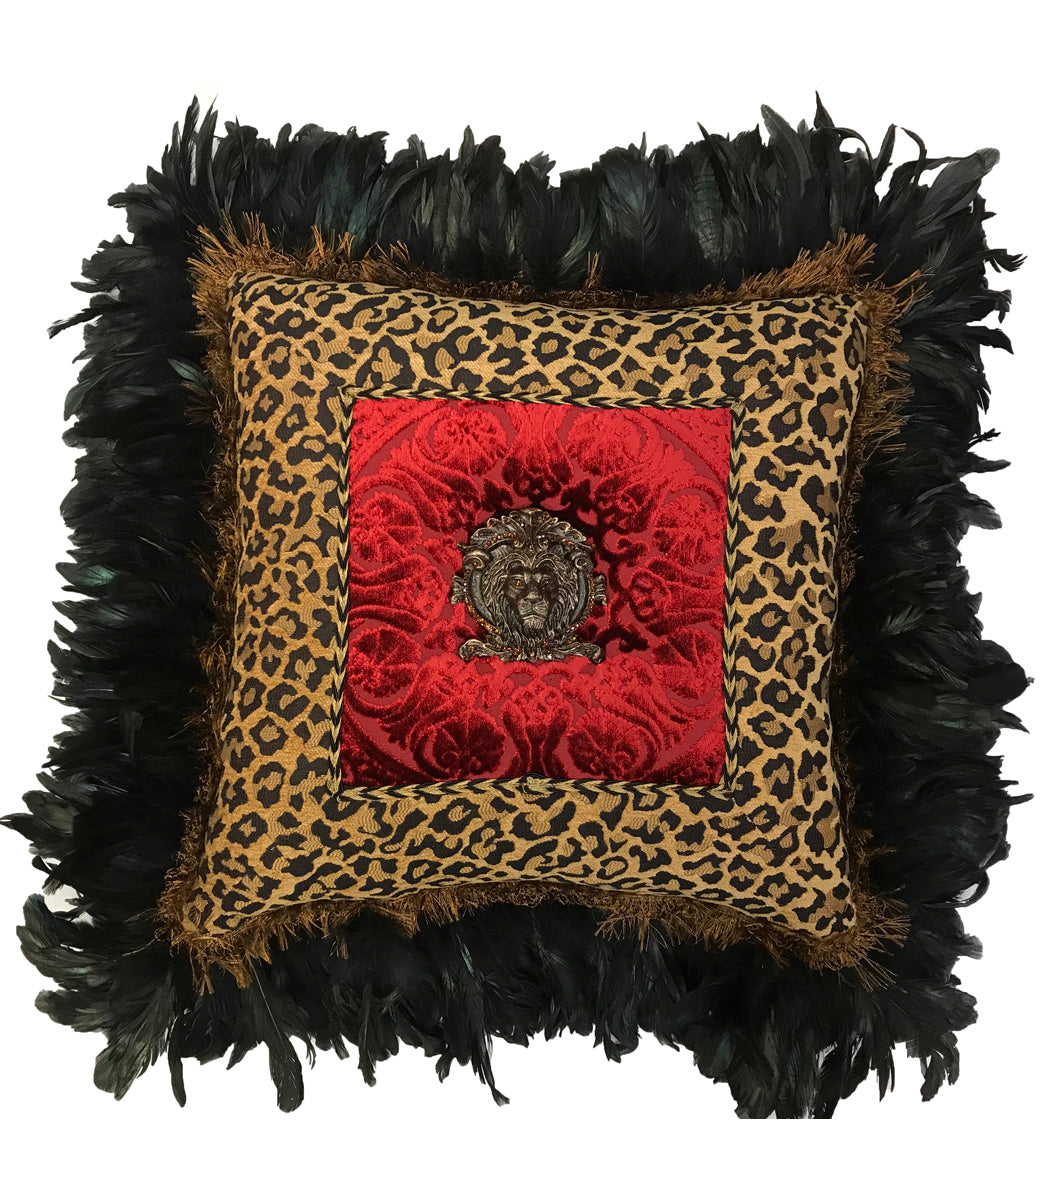 Designer Ruffled Leopard Accent Pillow with Jeweled Lion Medallion and Feathers